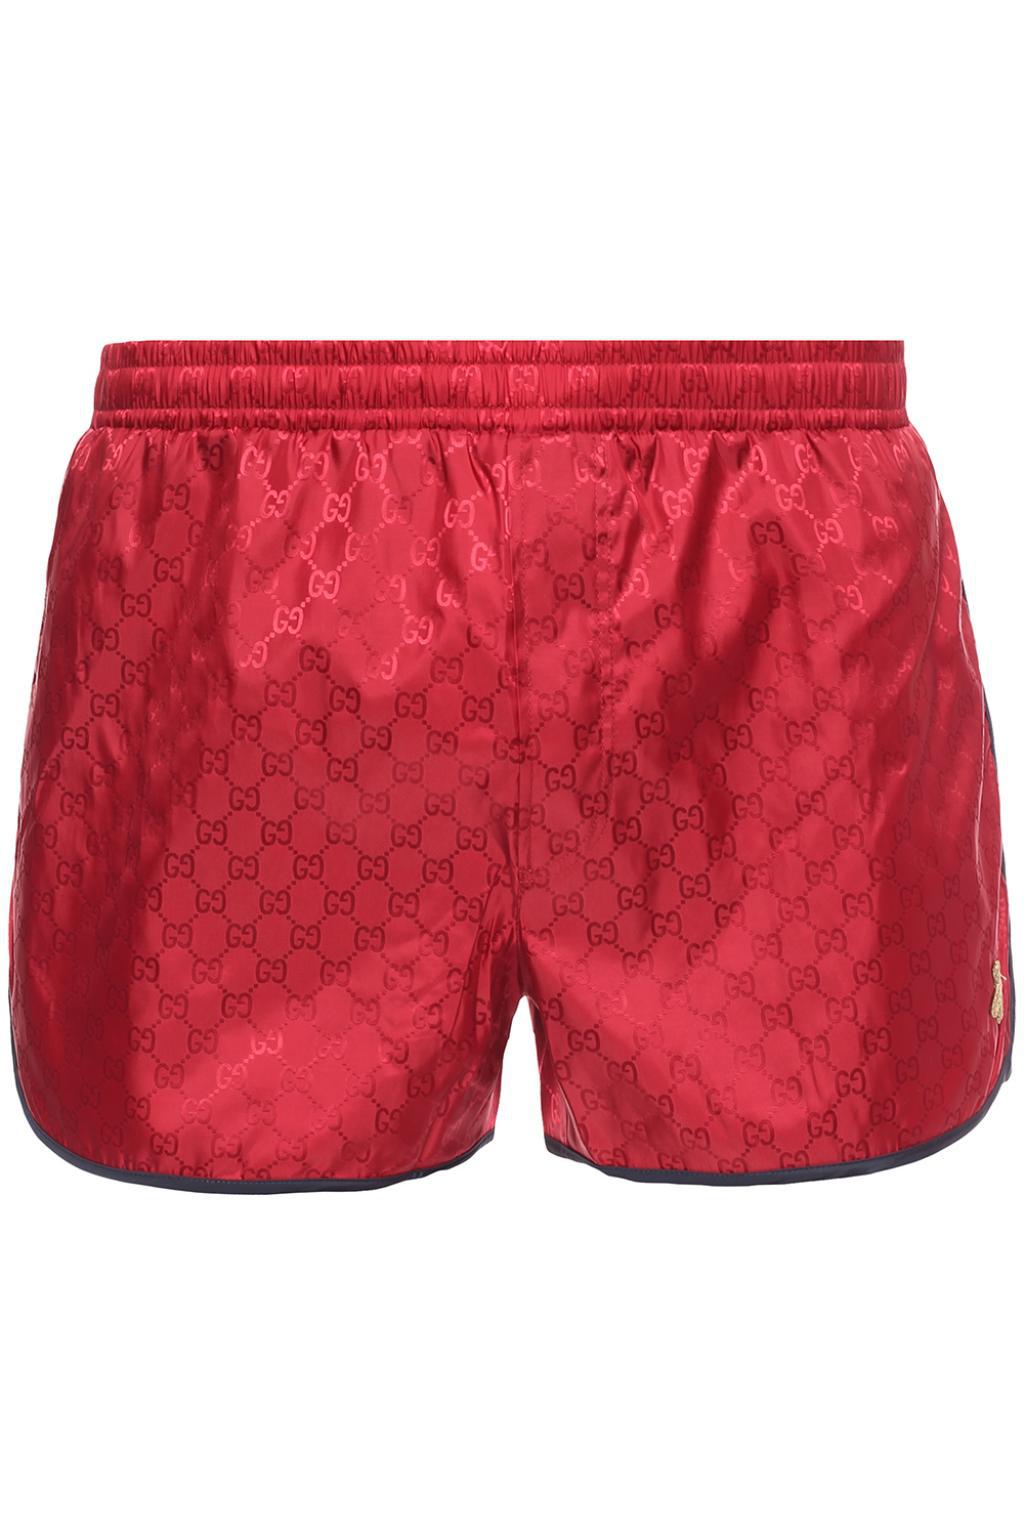 Gucci Synthetic Monogram Bee Embroidery Swim Shorts in Red for Men - Lyst